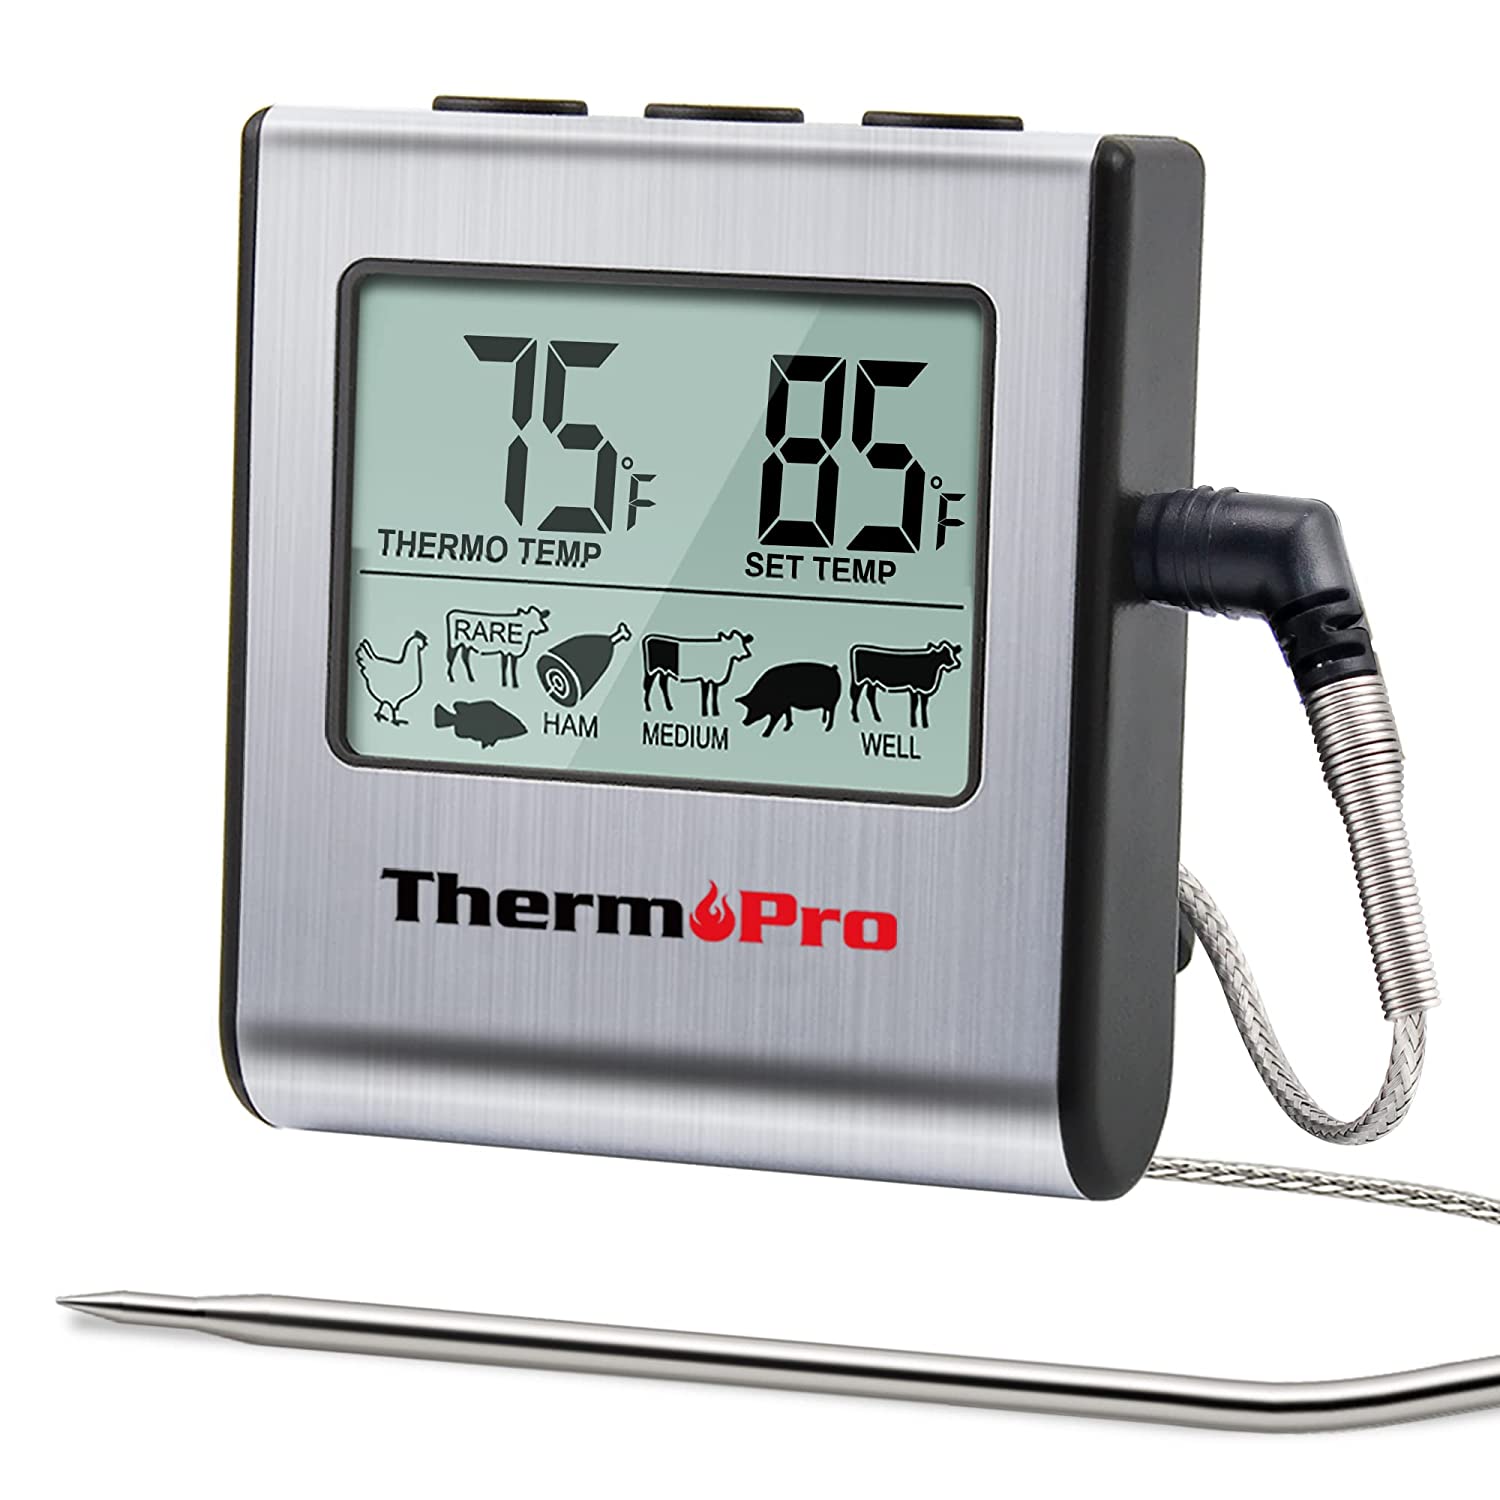 https://www.dontwasteyourmoney.com/wp-content/uploads/2020/11/thermopro-tp-16-stainless-steel-probe-digital-meat-thermometer.jpg